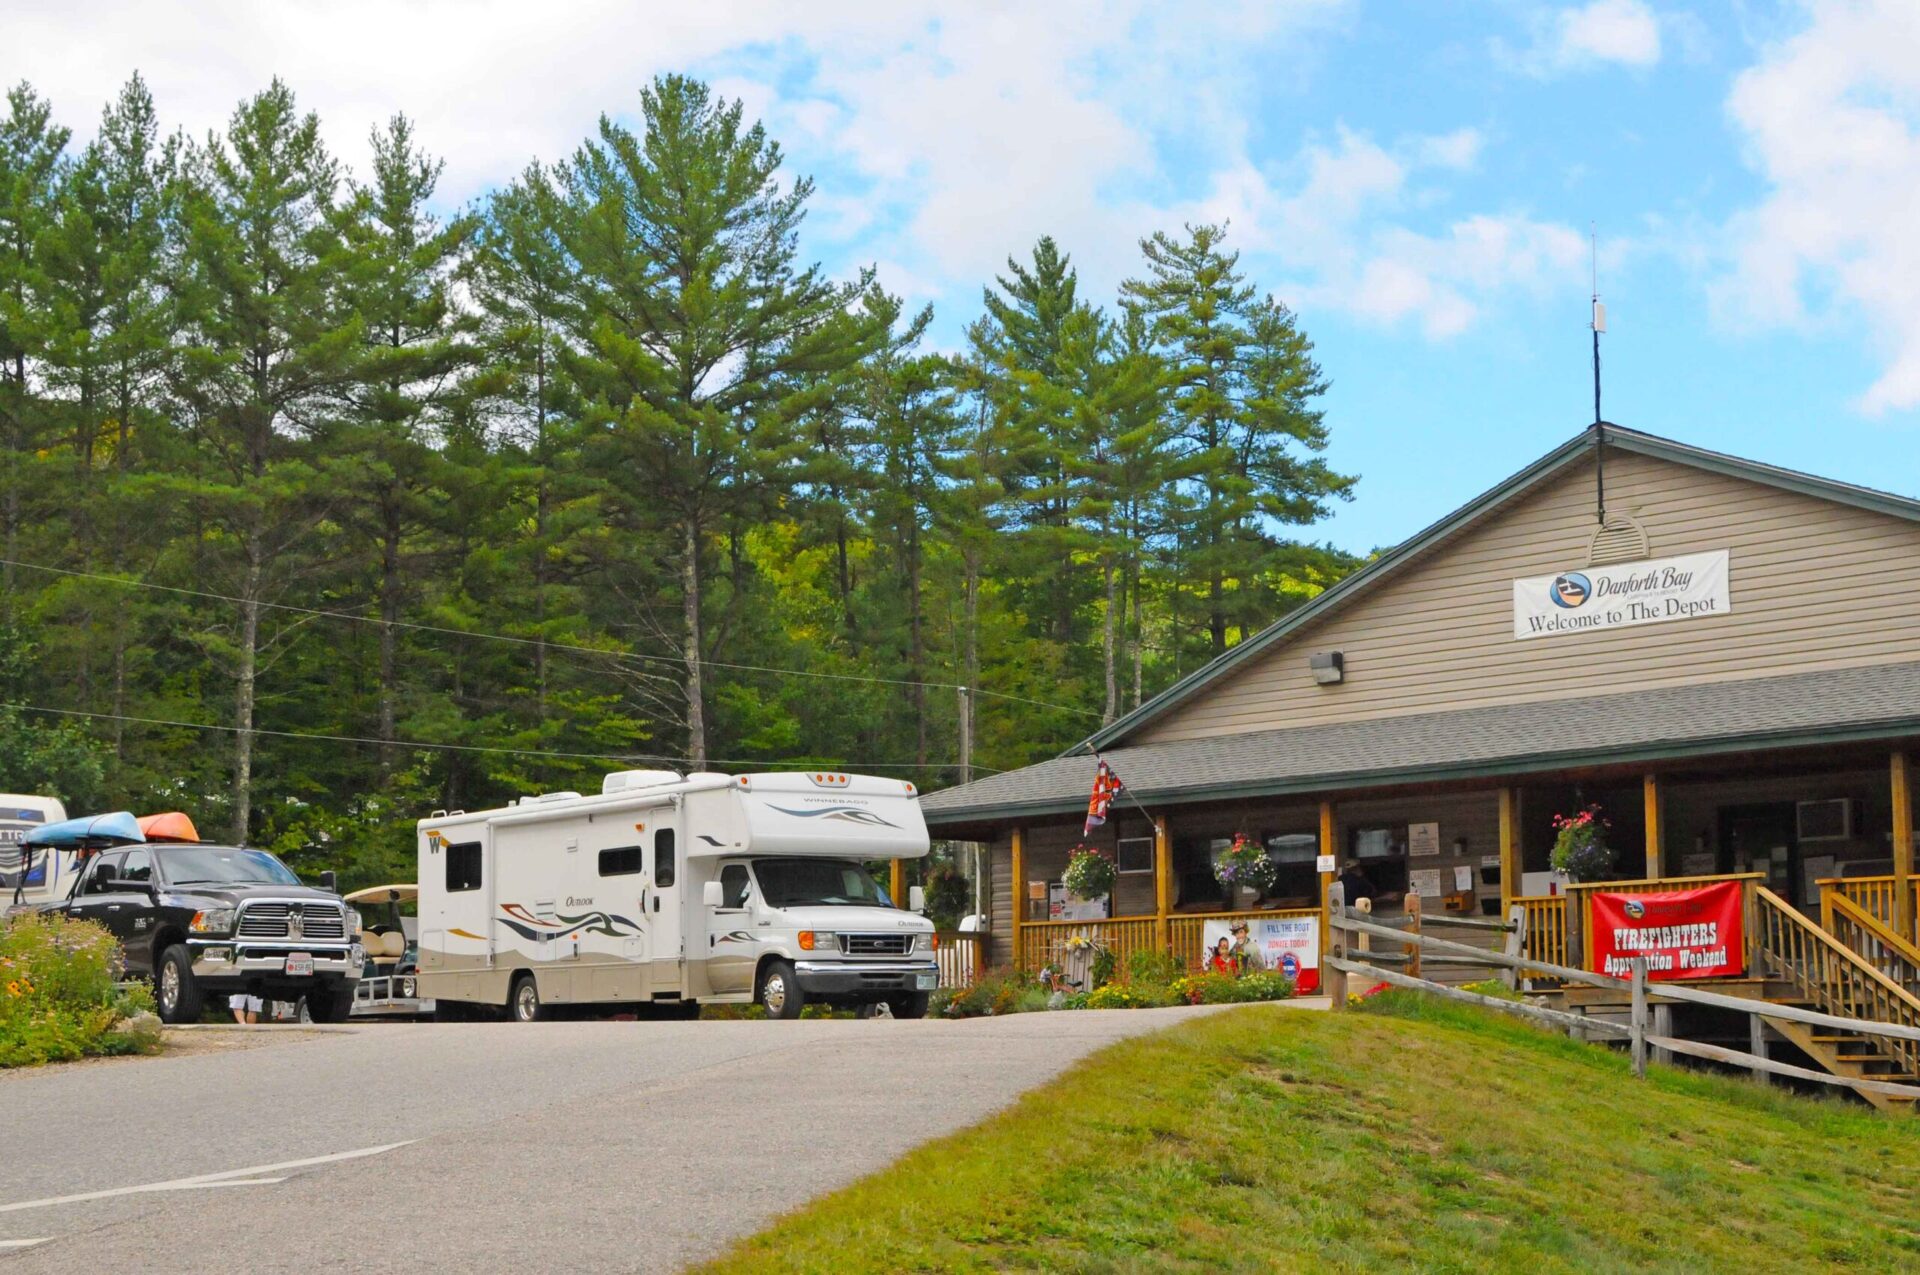 A view of The Depot and Main Office check-in at Danforth Bay Camping & RV Resort